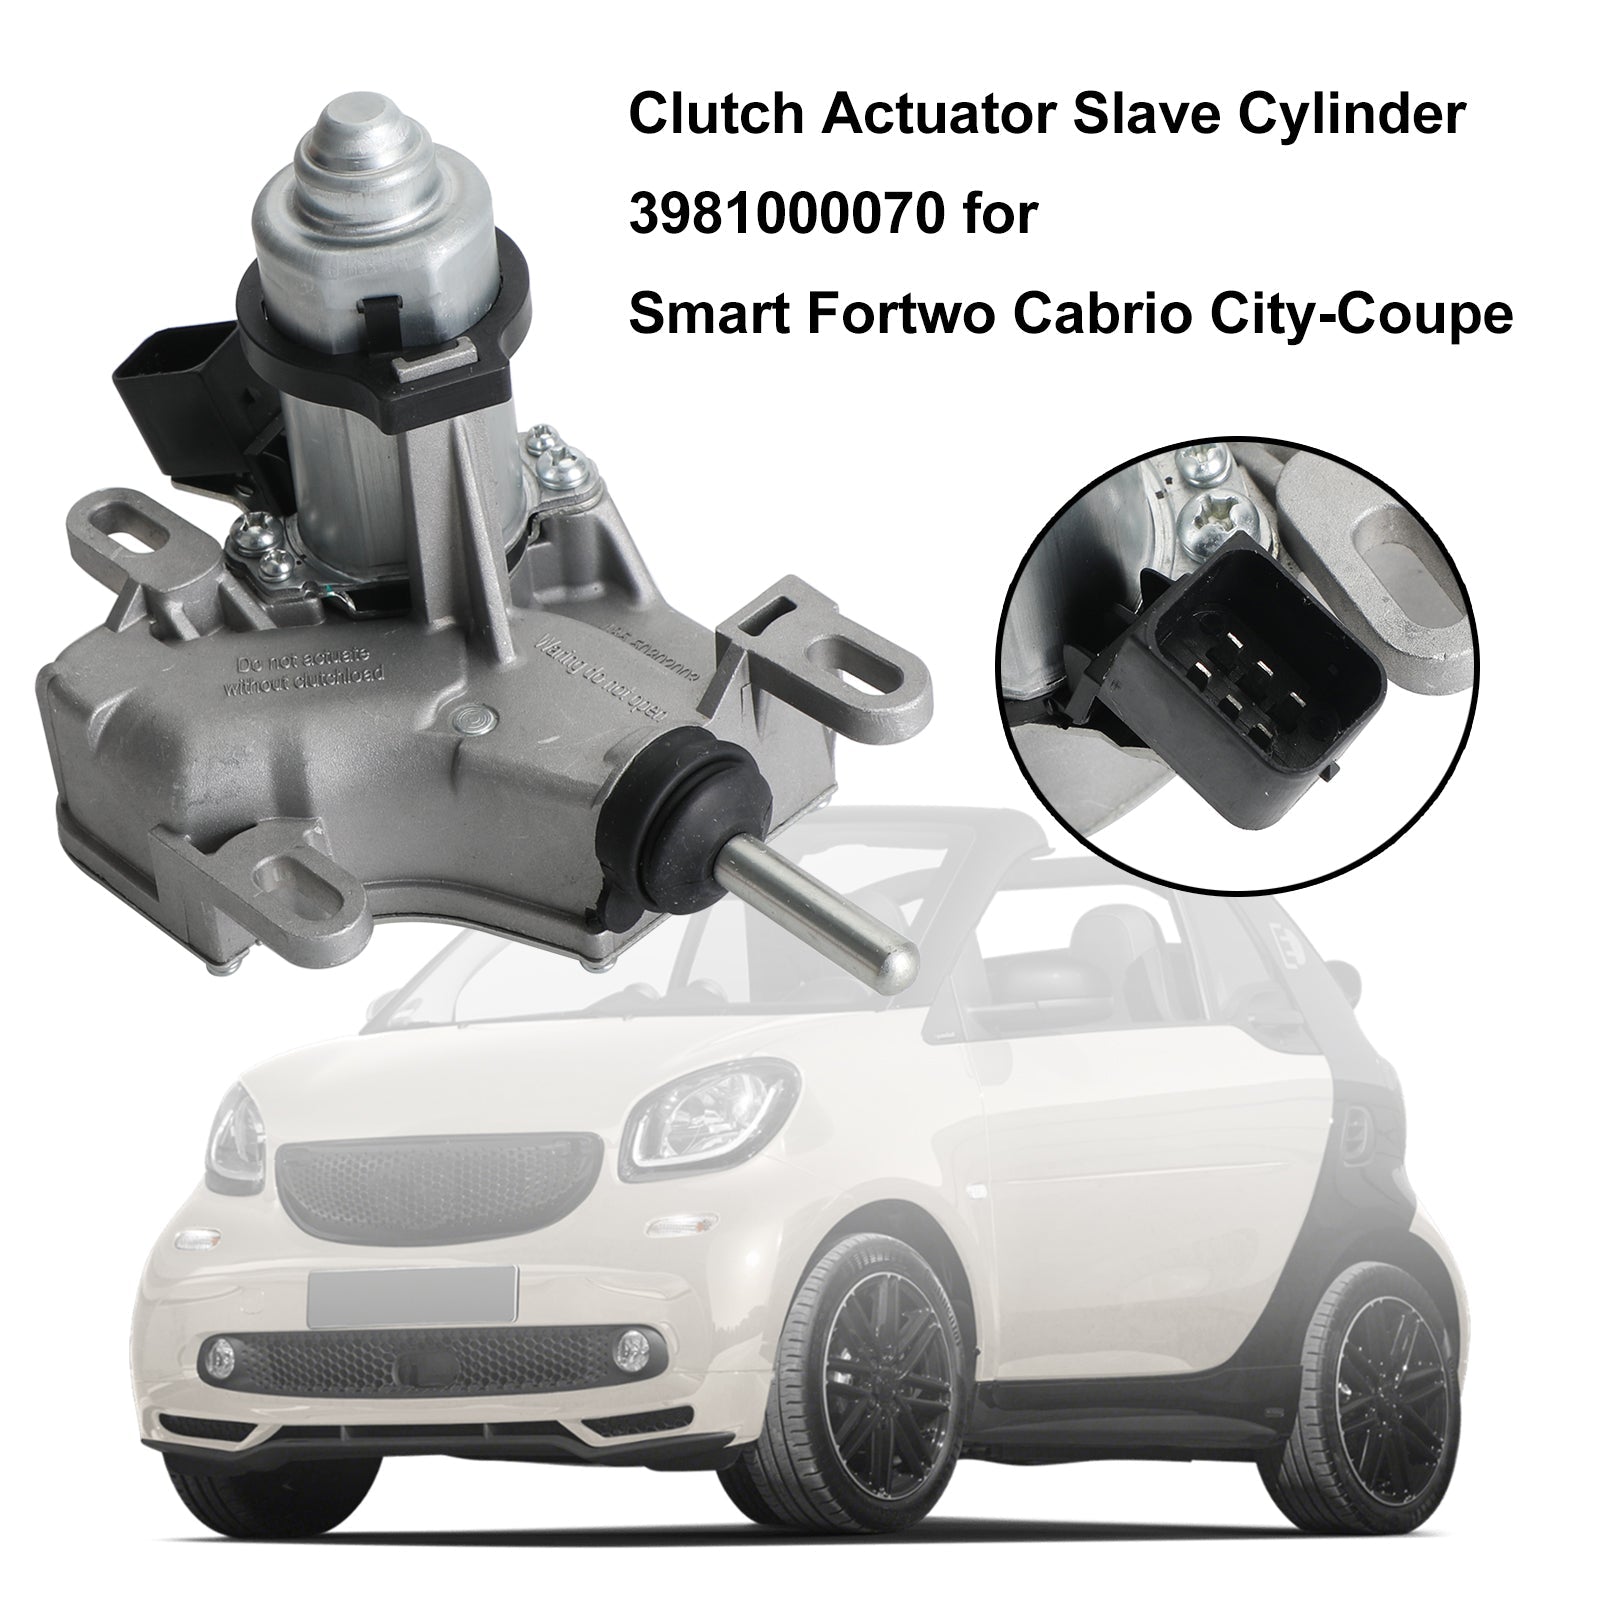 Smart Fortwo Cabrio City-Coupe Crayat Actuator Slave Cylinder 3981000070